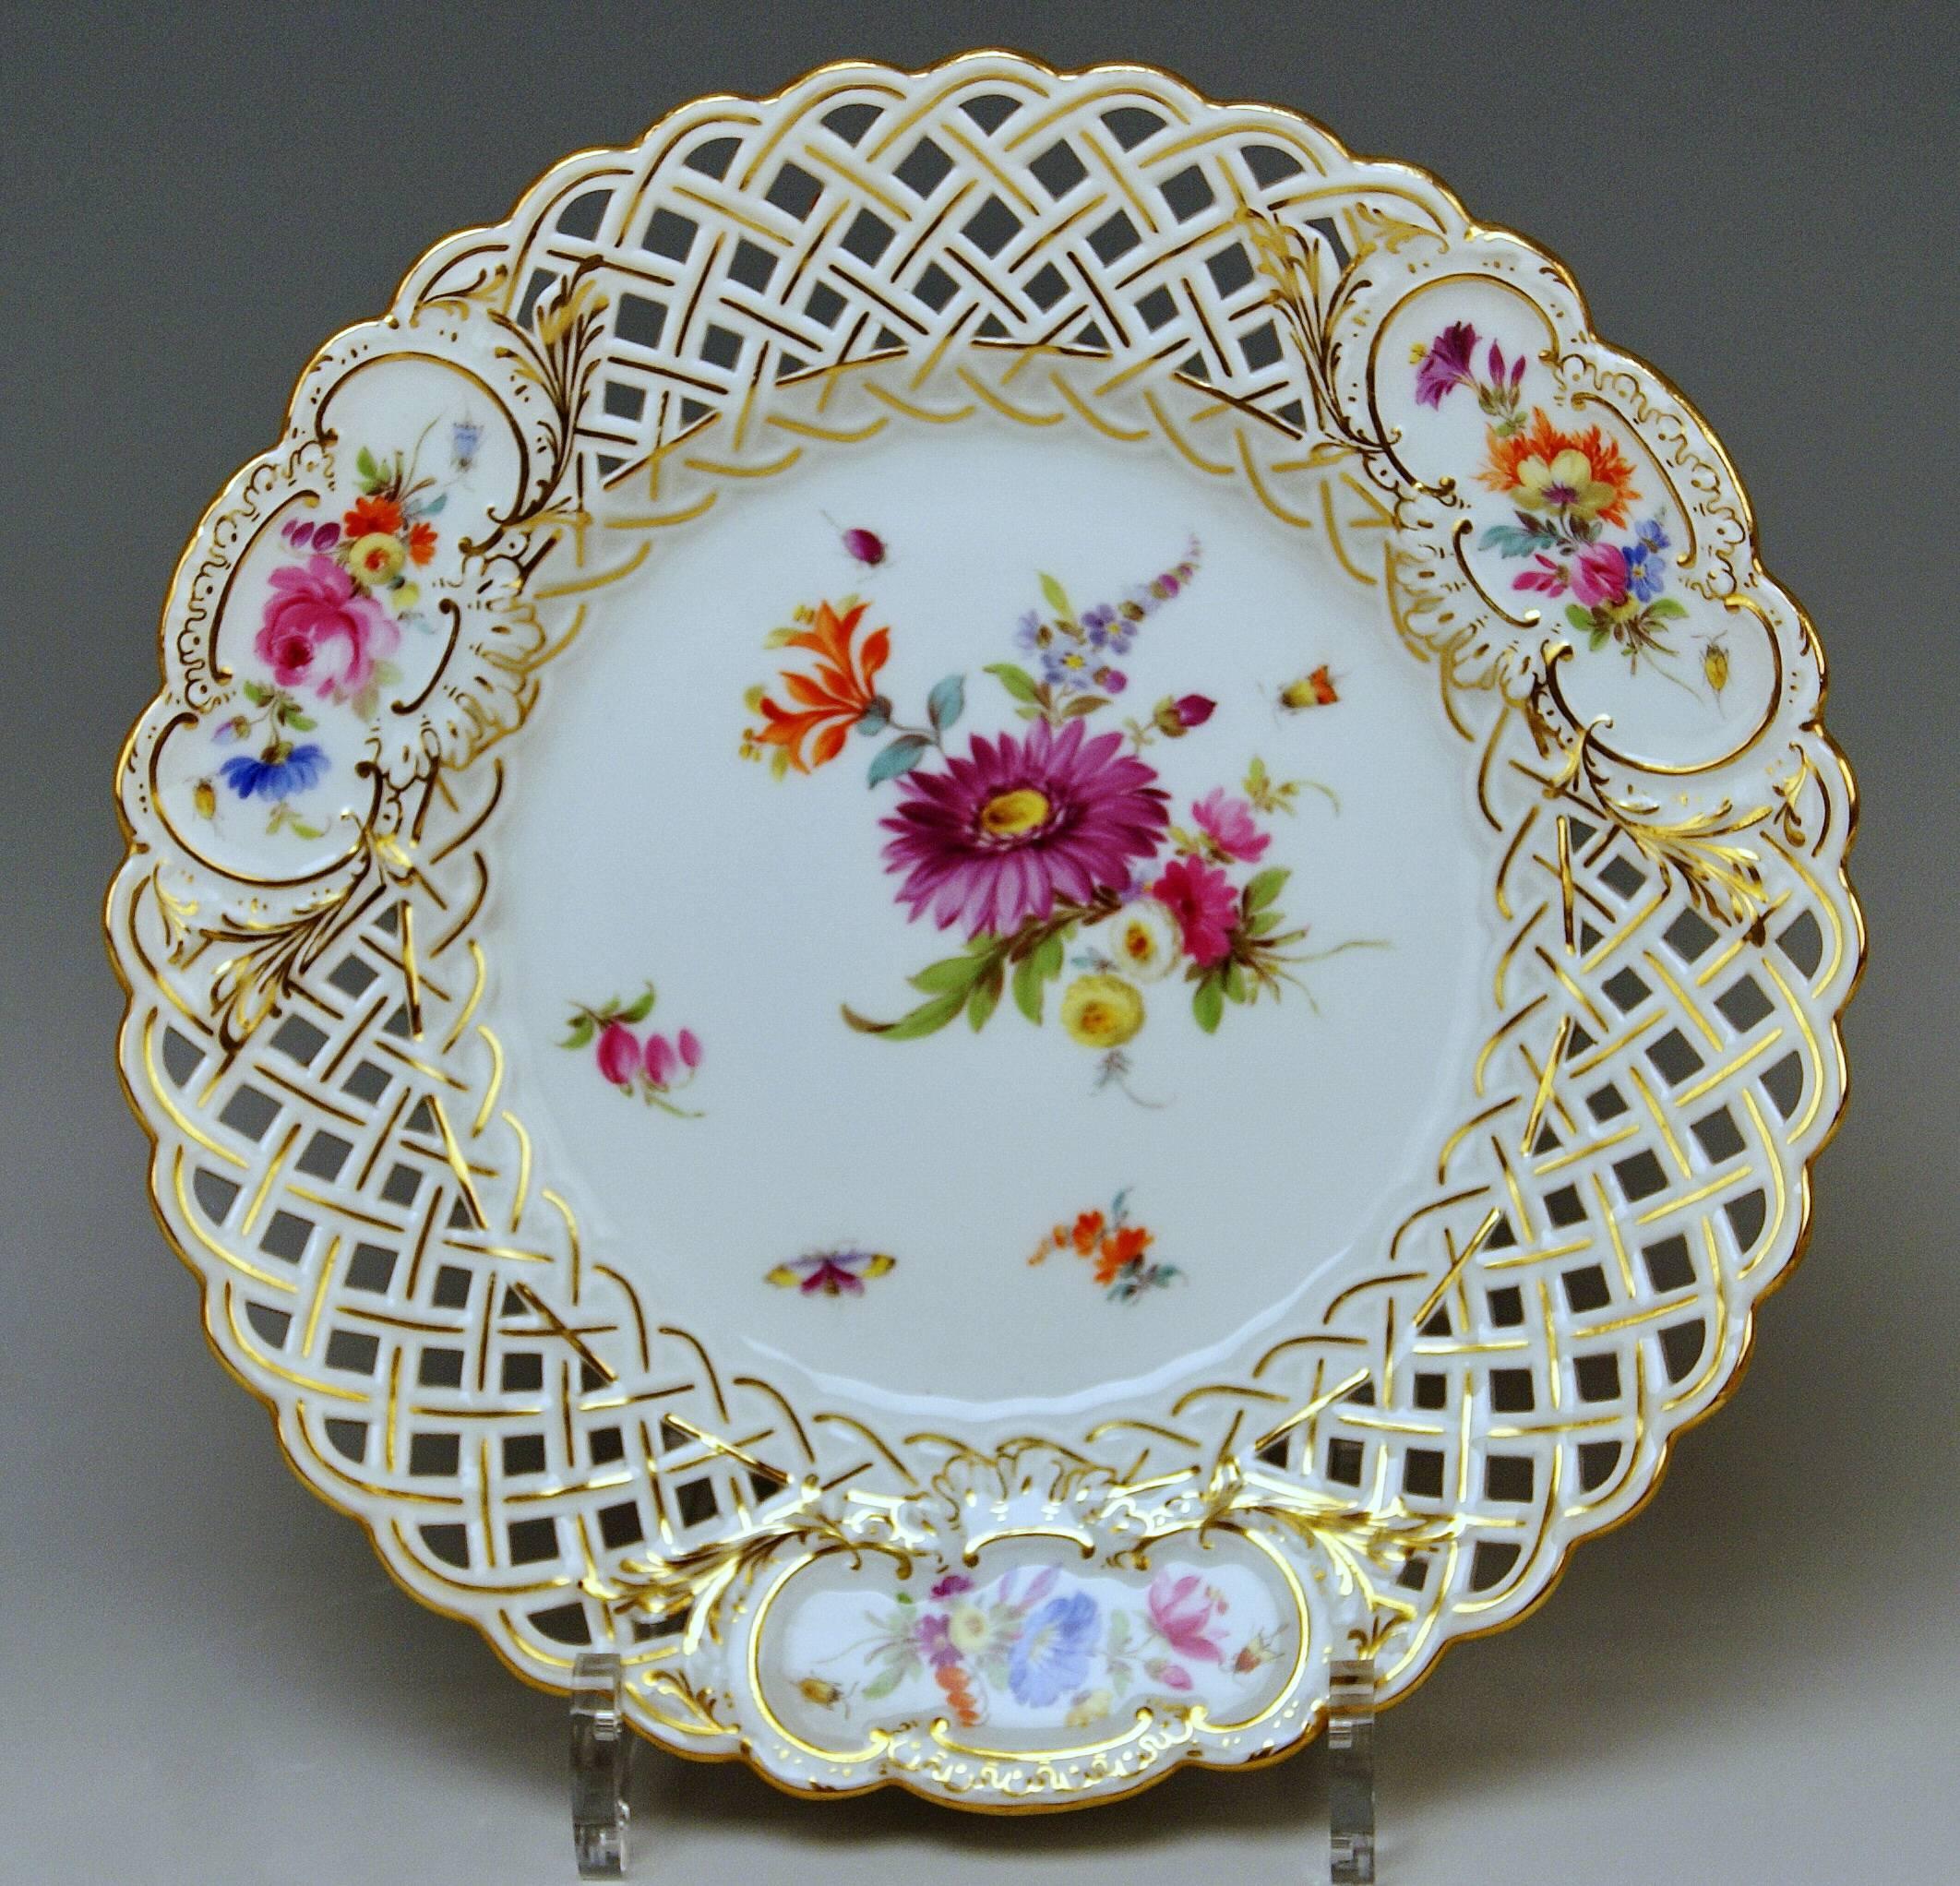 Painted Meissen Plates Vintage Reticulated Edge Multicolored Flower Paintings circa 1870